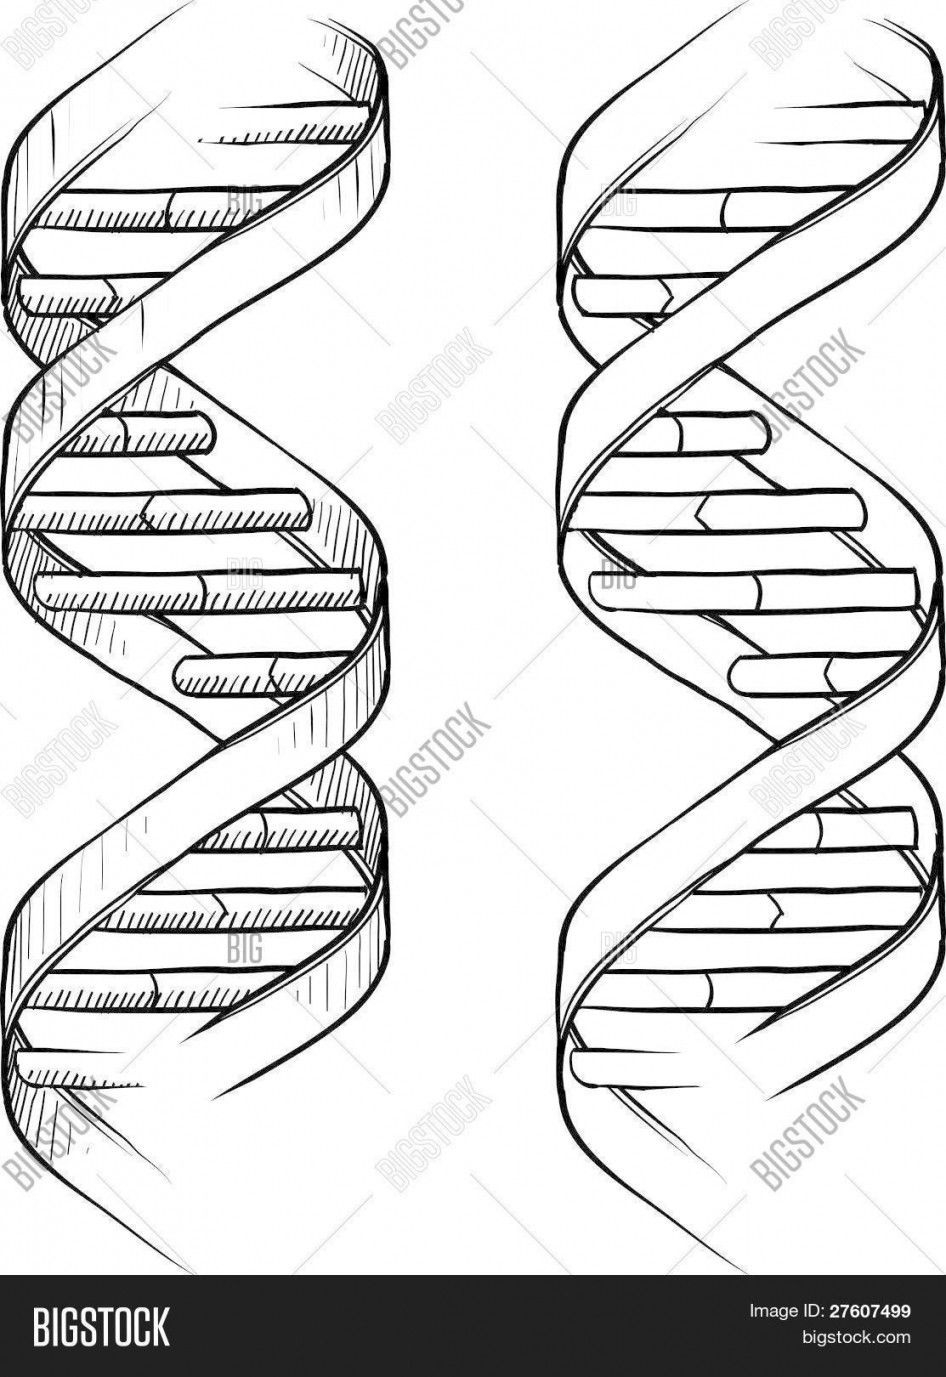 Dna The Double Helix Coloring Worksheet Answers